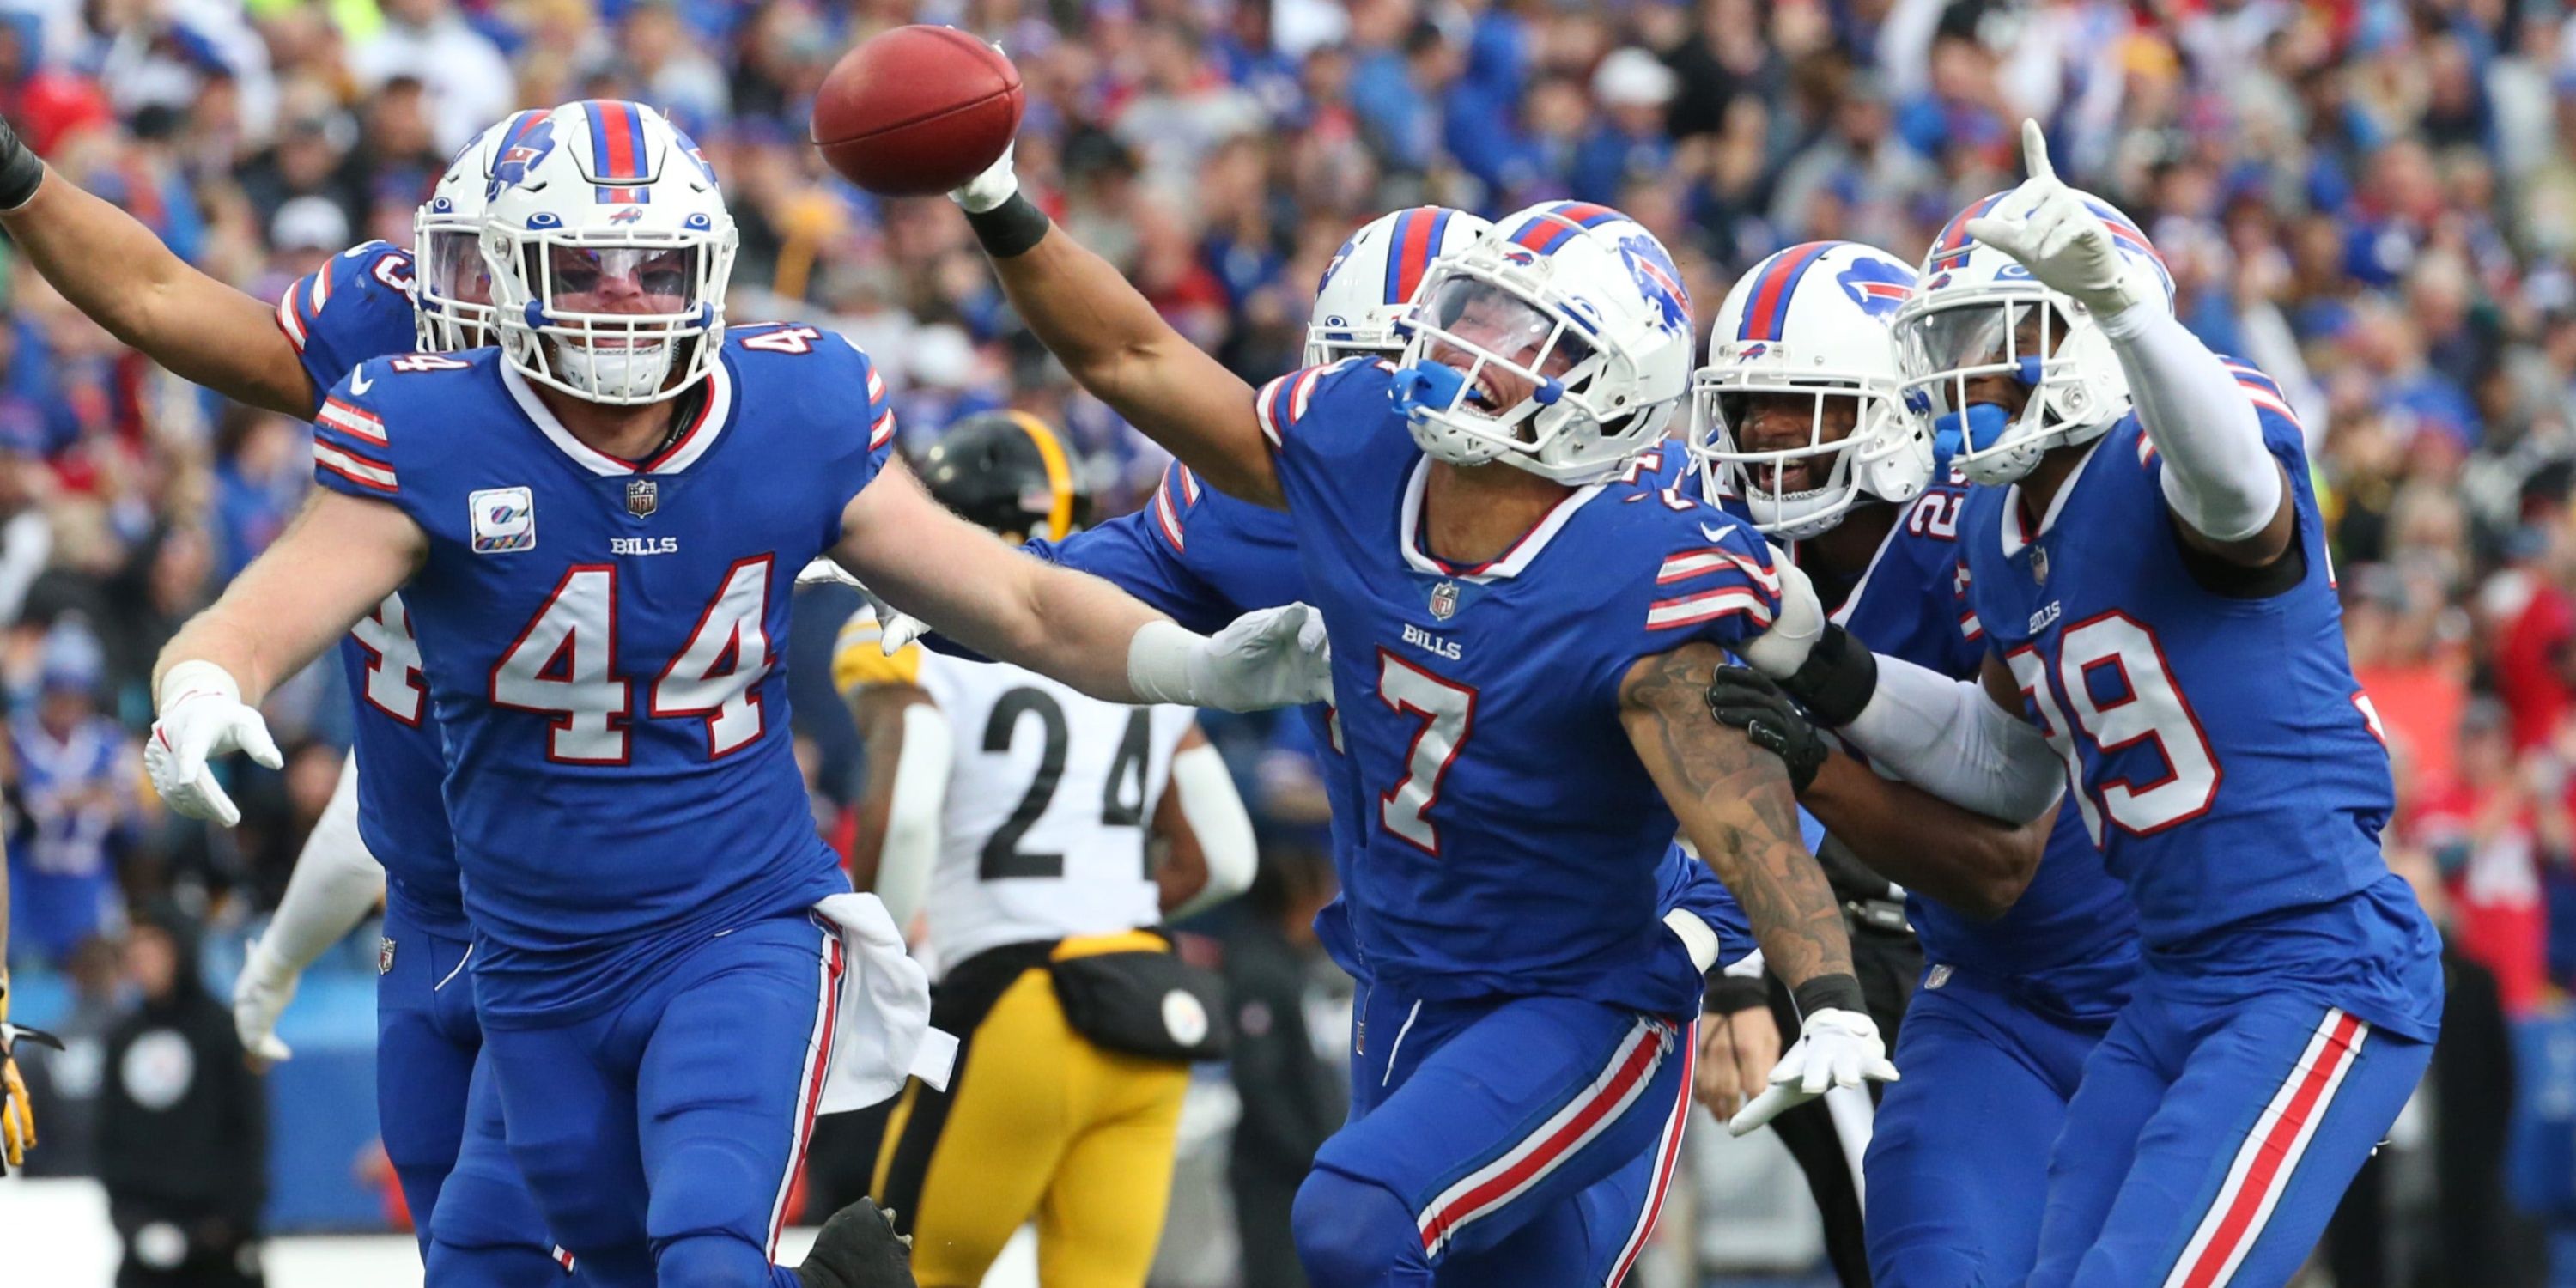 Taron Johnson and the Bills defense celebrate a turnover against the Steelers